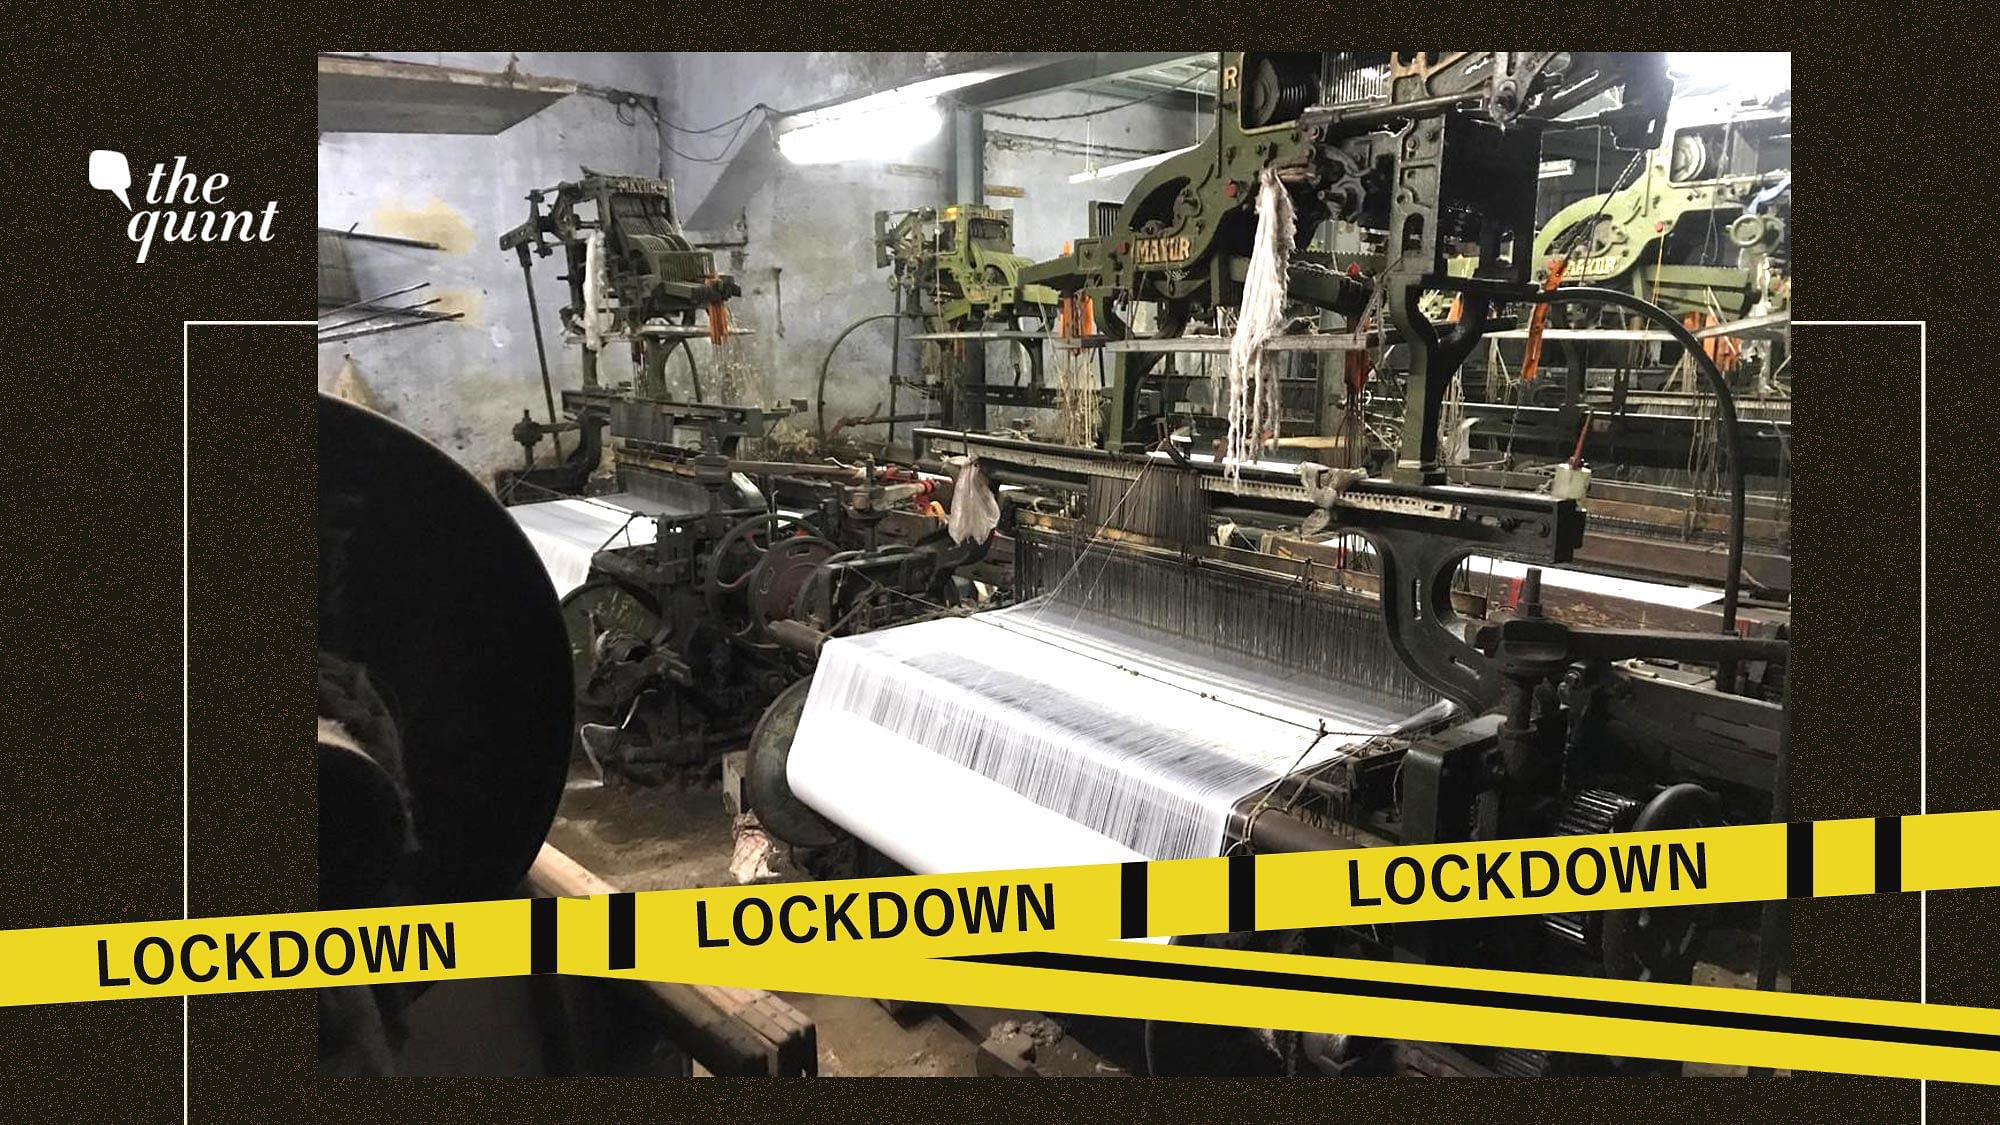 Despite the lockdown being lifted, Bhiwandi’s power loom industry is yet to recover.